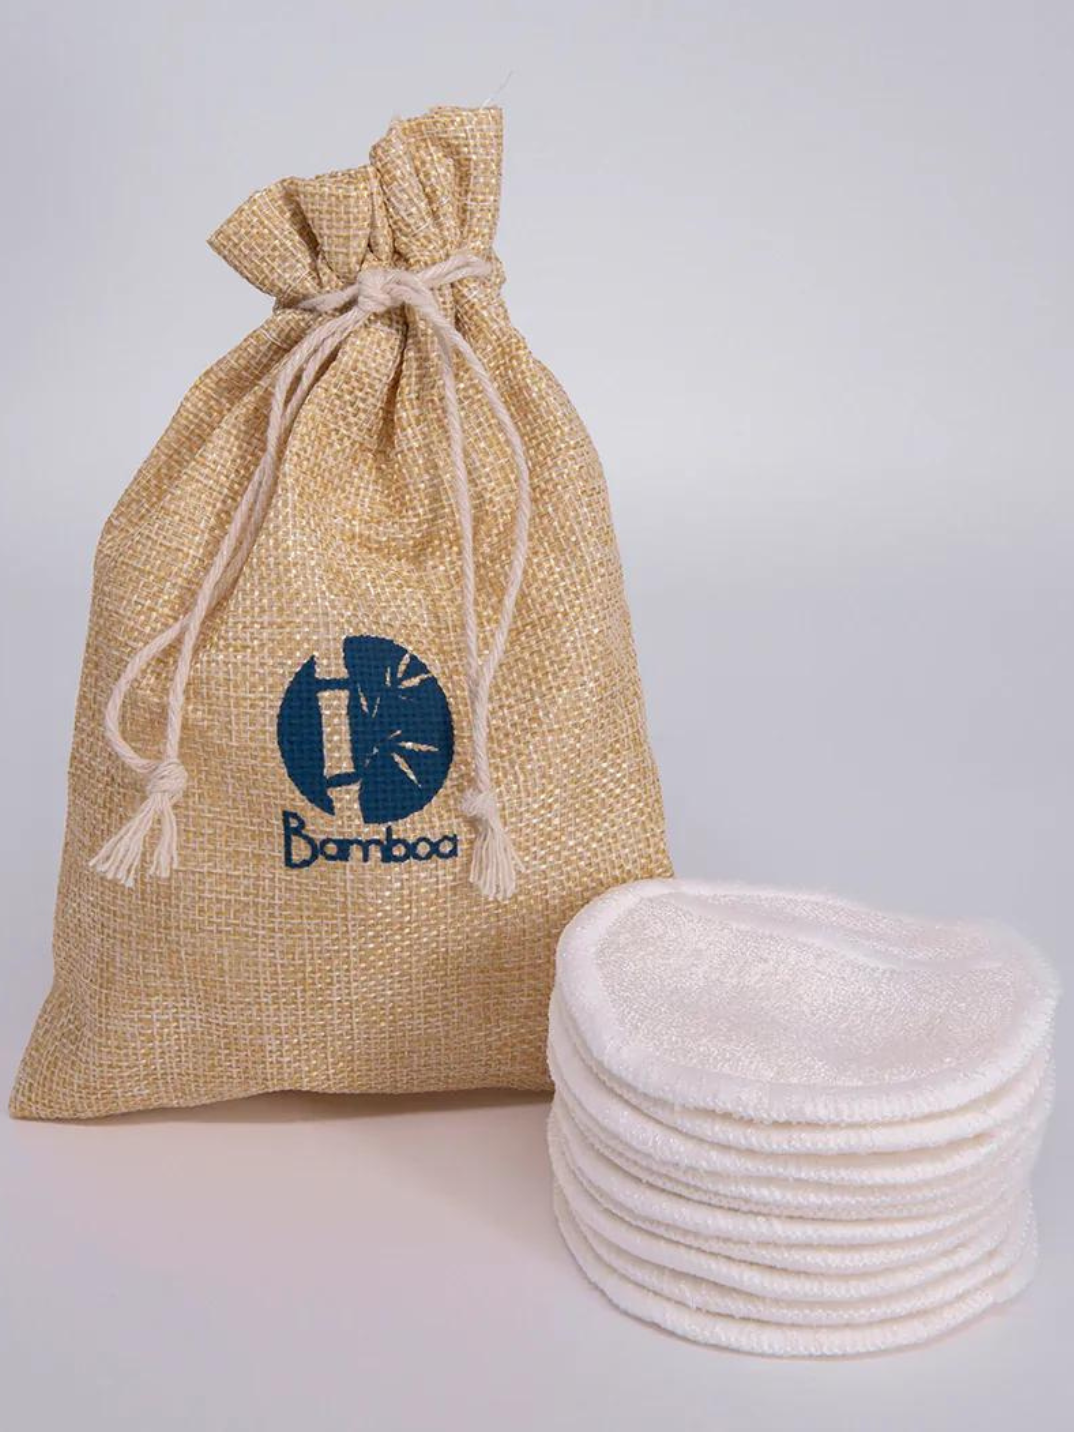 Our 100% bamboo fiber reusable face wipes are a great sustainable alternative to disposable facial rounds, single-use wipes, or cotton pads/balls. They're made from a soft terry bamboo that's perfect to use on delicate skin. These wipes have a little fold to put your fingers for easy use.